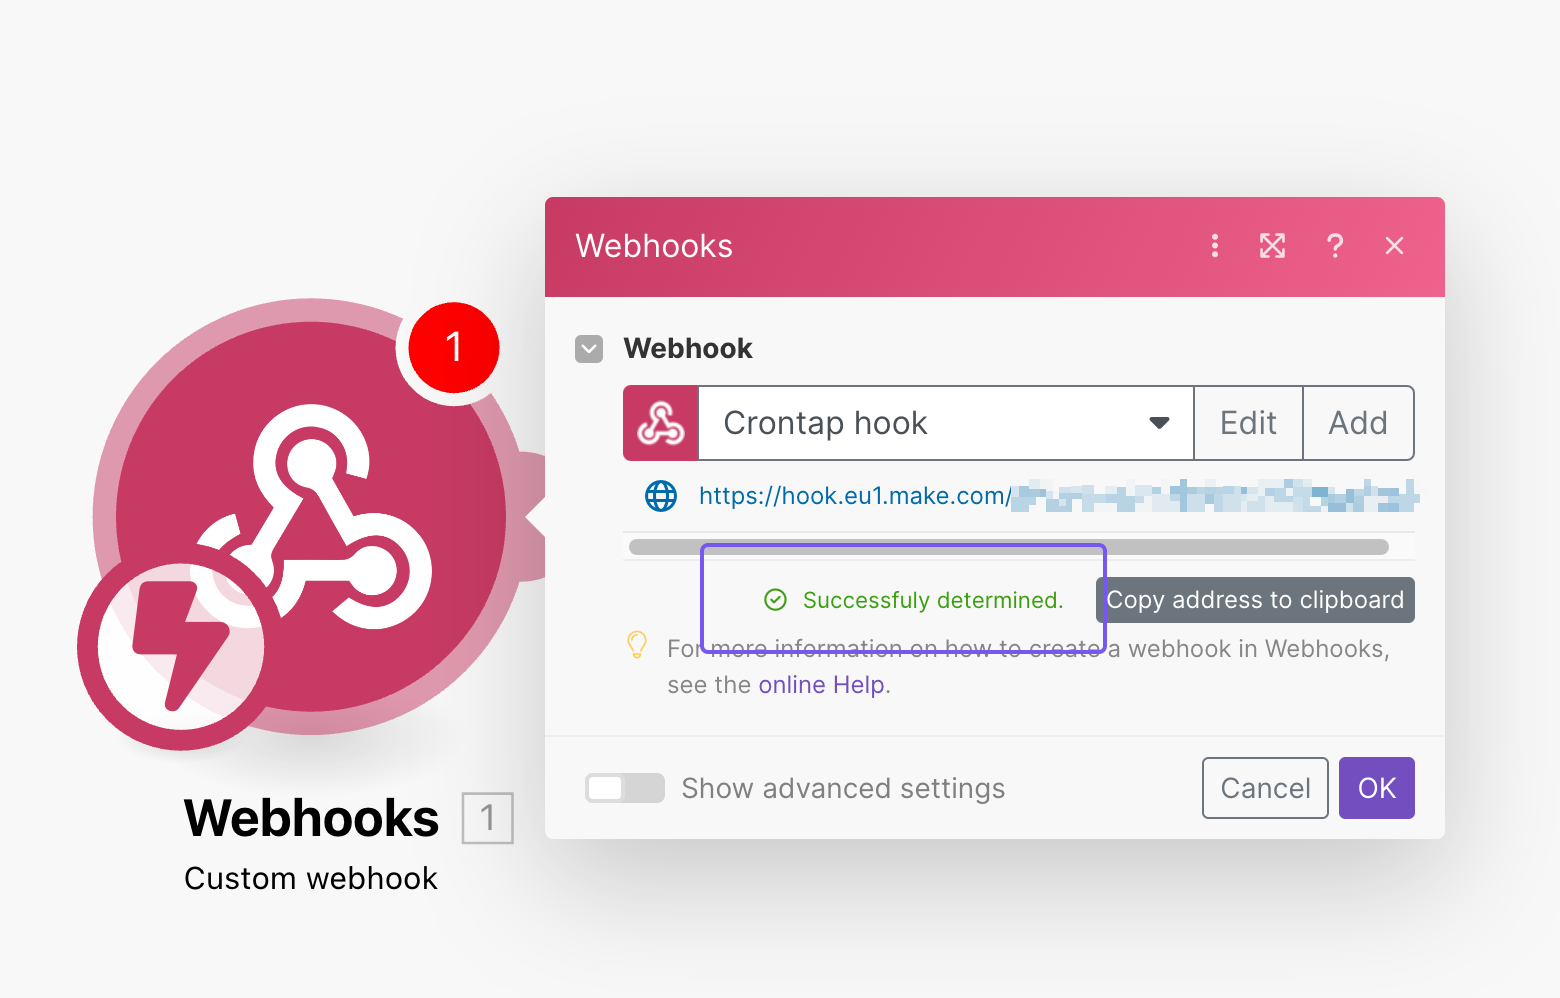 Webhook structure Successfully determined in make.com